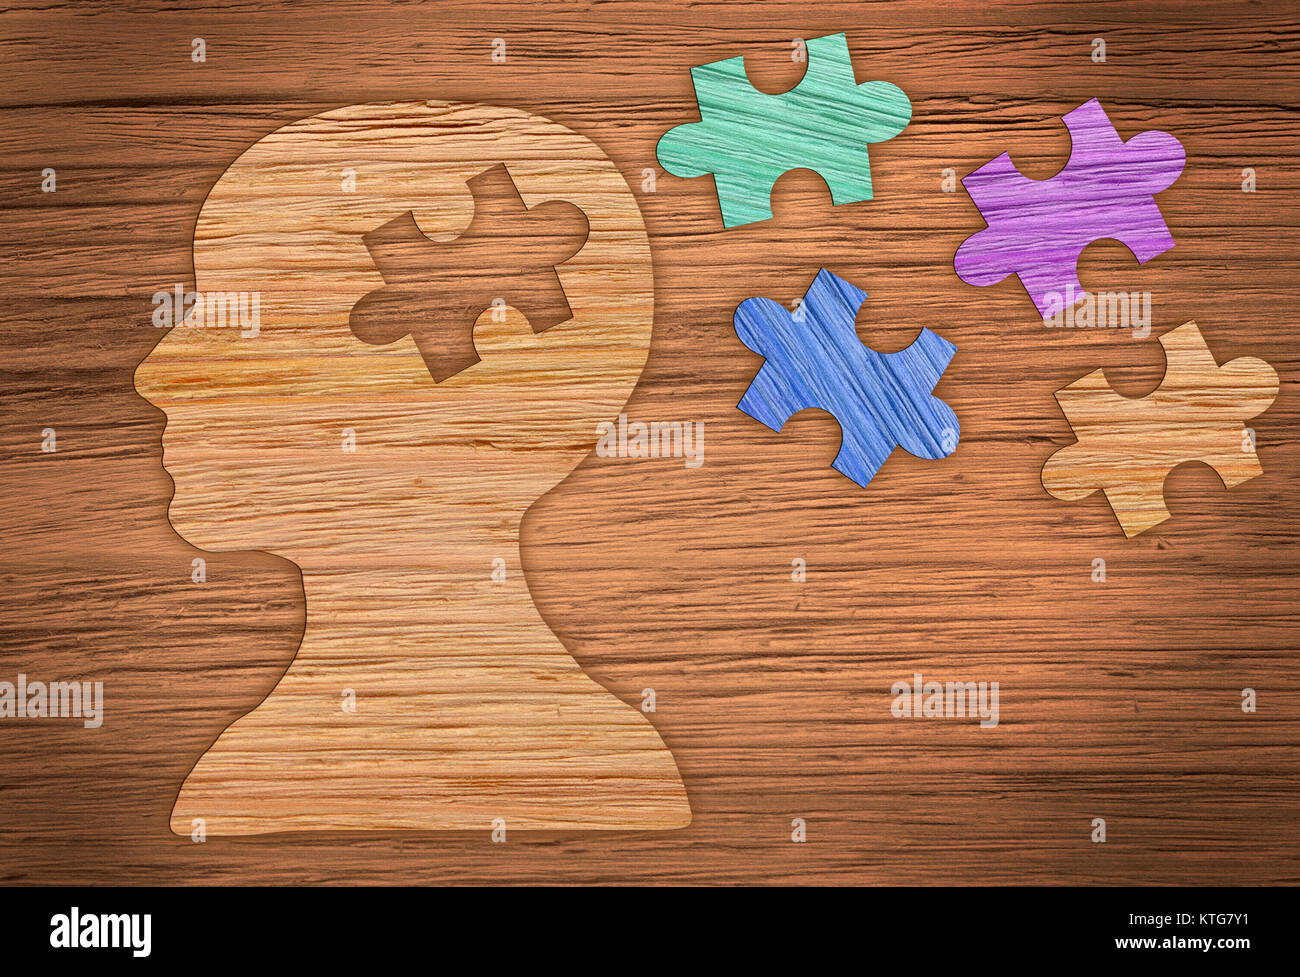 Puzzle head brain concept. Human head profile made from brown paper with a jigsaw piece cut out. Stock Photo